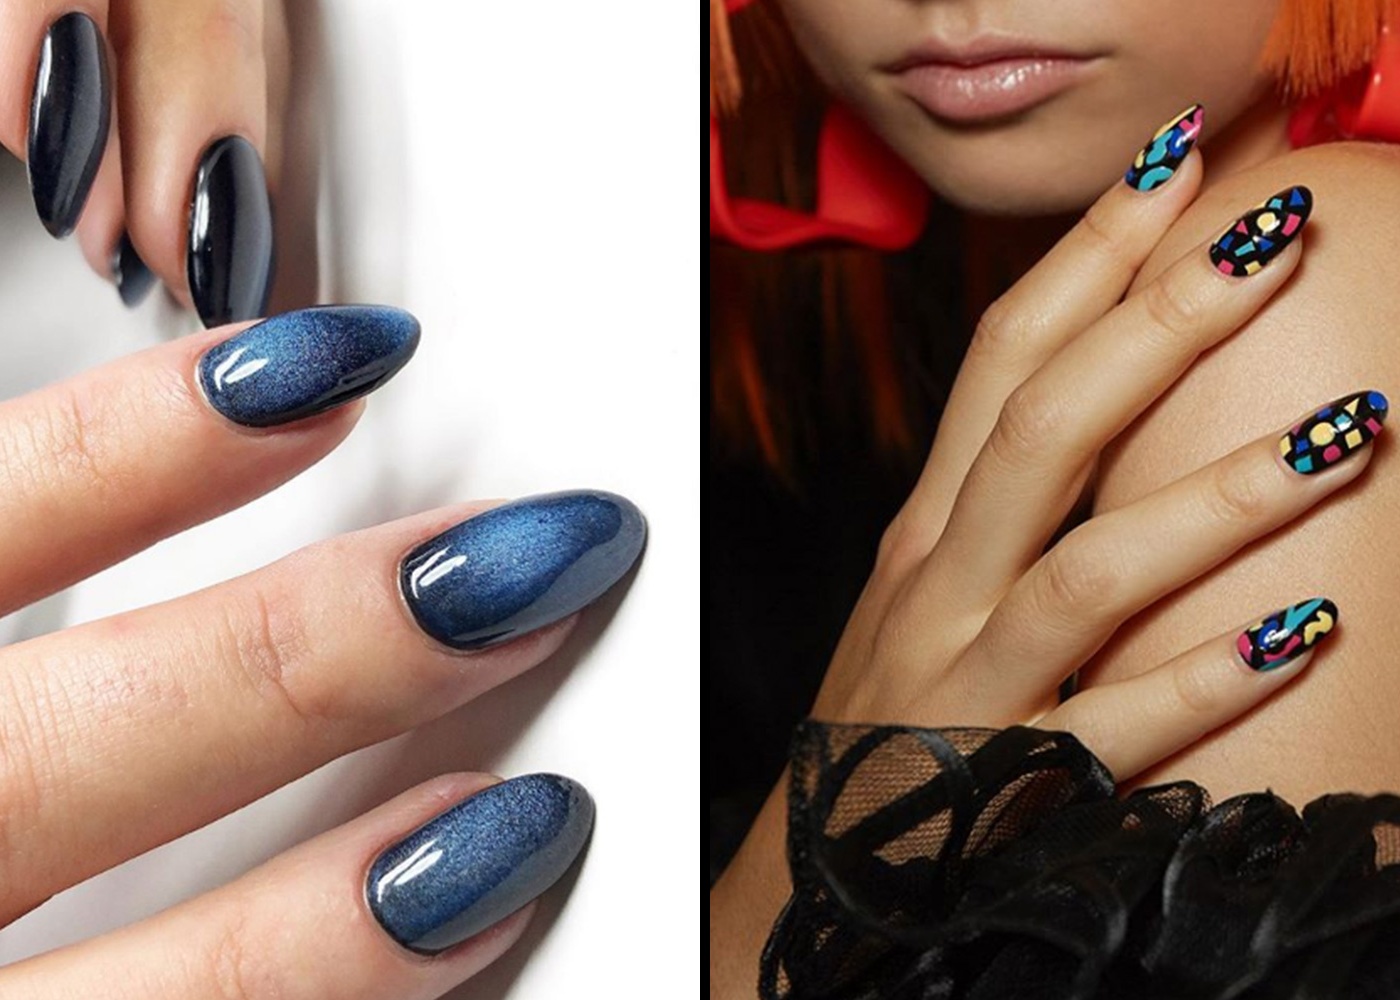 4. "New Nail Art Trends to Elevate Your Style" - wide 1